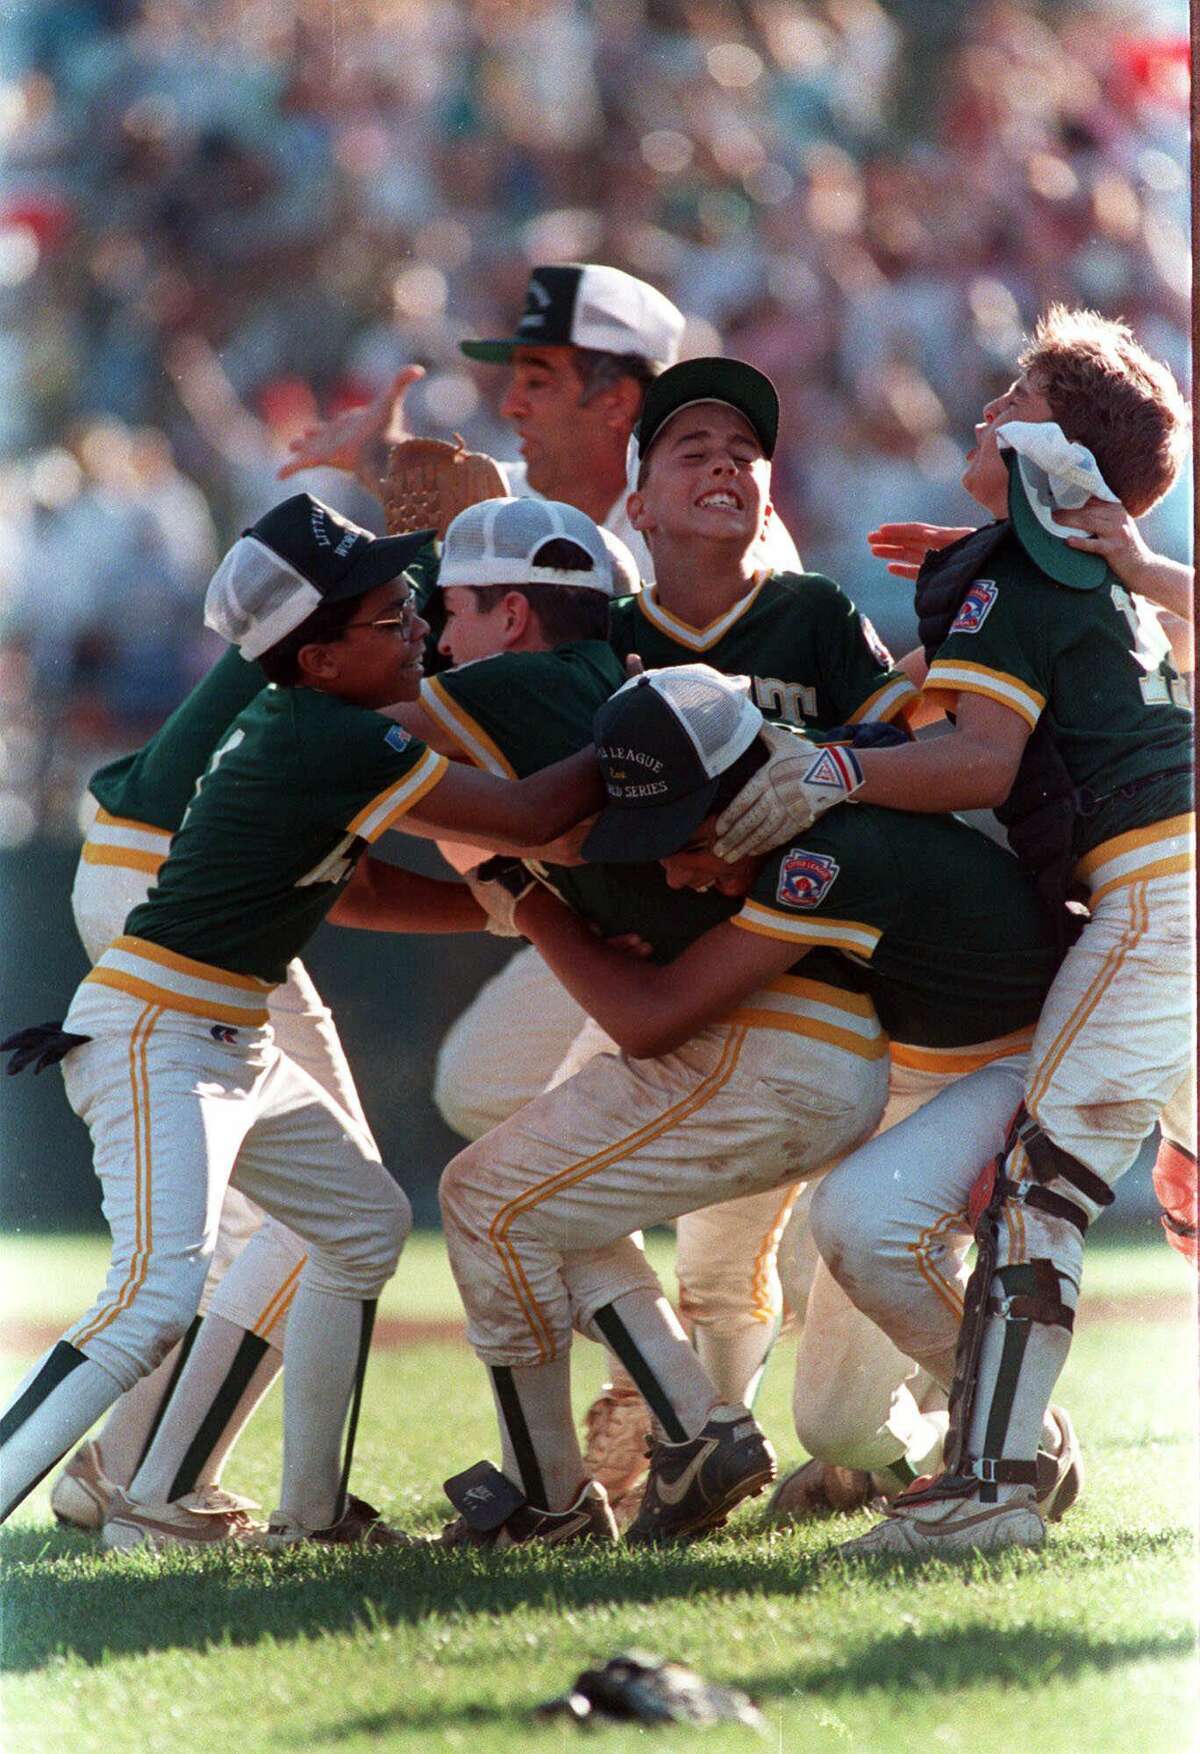 Members of the Trumbull,Conn., Little League team mob winning pitcher Chris Drury, second from left with cap askew, Aug. 26, 1989 as they celebrate on the field at Williamsport, Pa. Connecticut had just defeated Taiwan in the championship game of the Little League World Series. In background is Connecticut coach Bob Zullo.